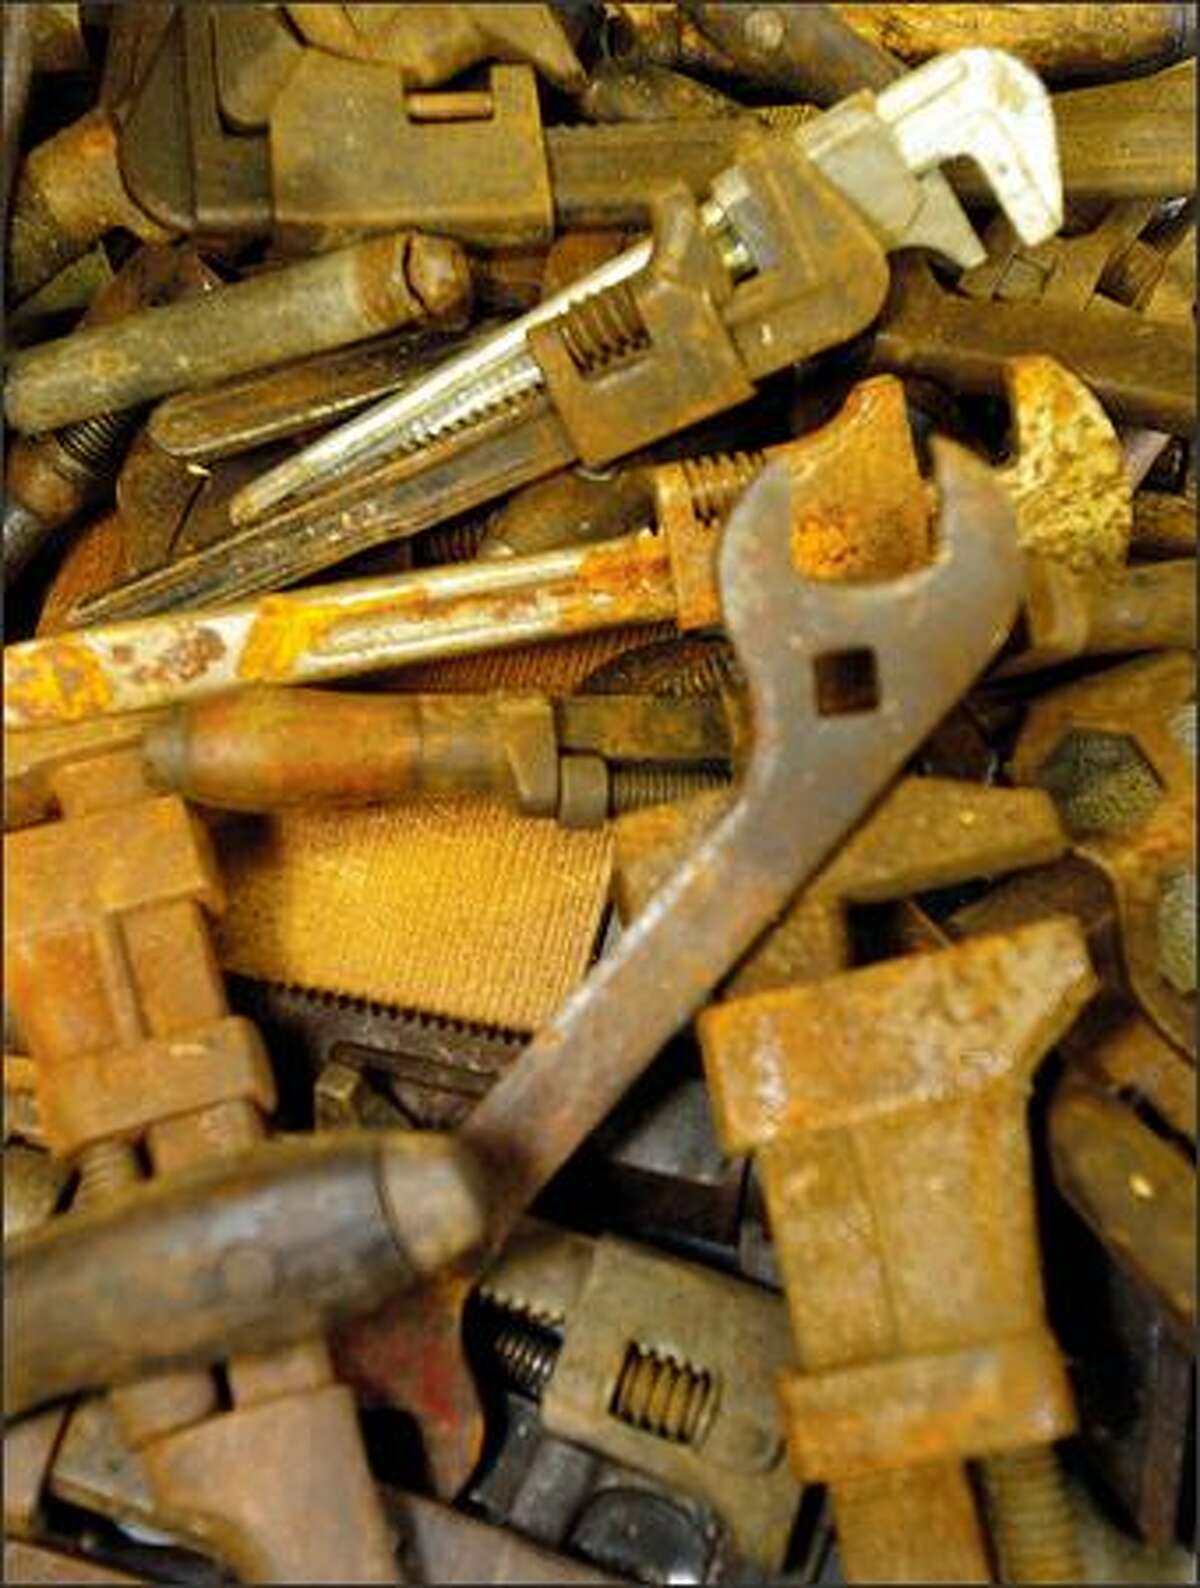 A pile of wrenches waits for wall space at the Western Heritage Center Interactive Museum at the Evergreen State Fairgrounds in Monroe.